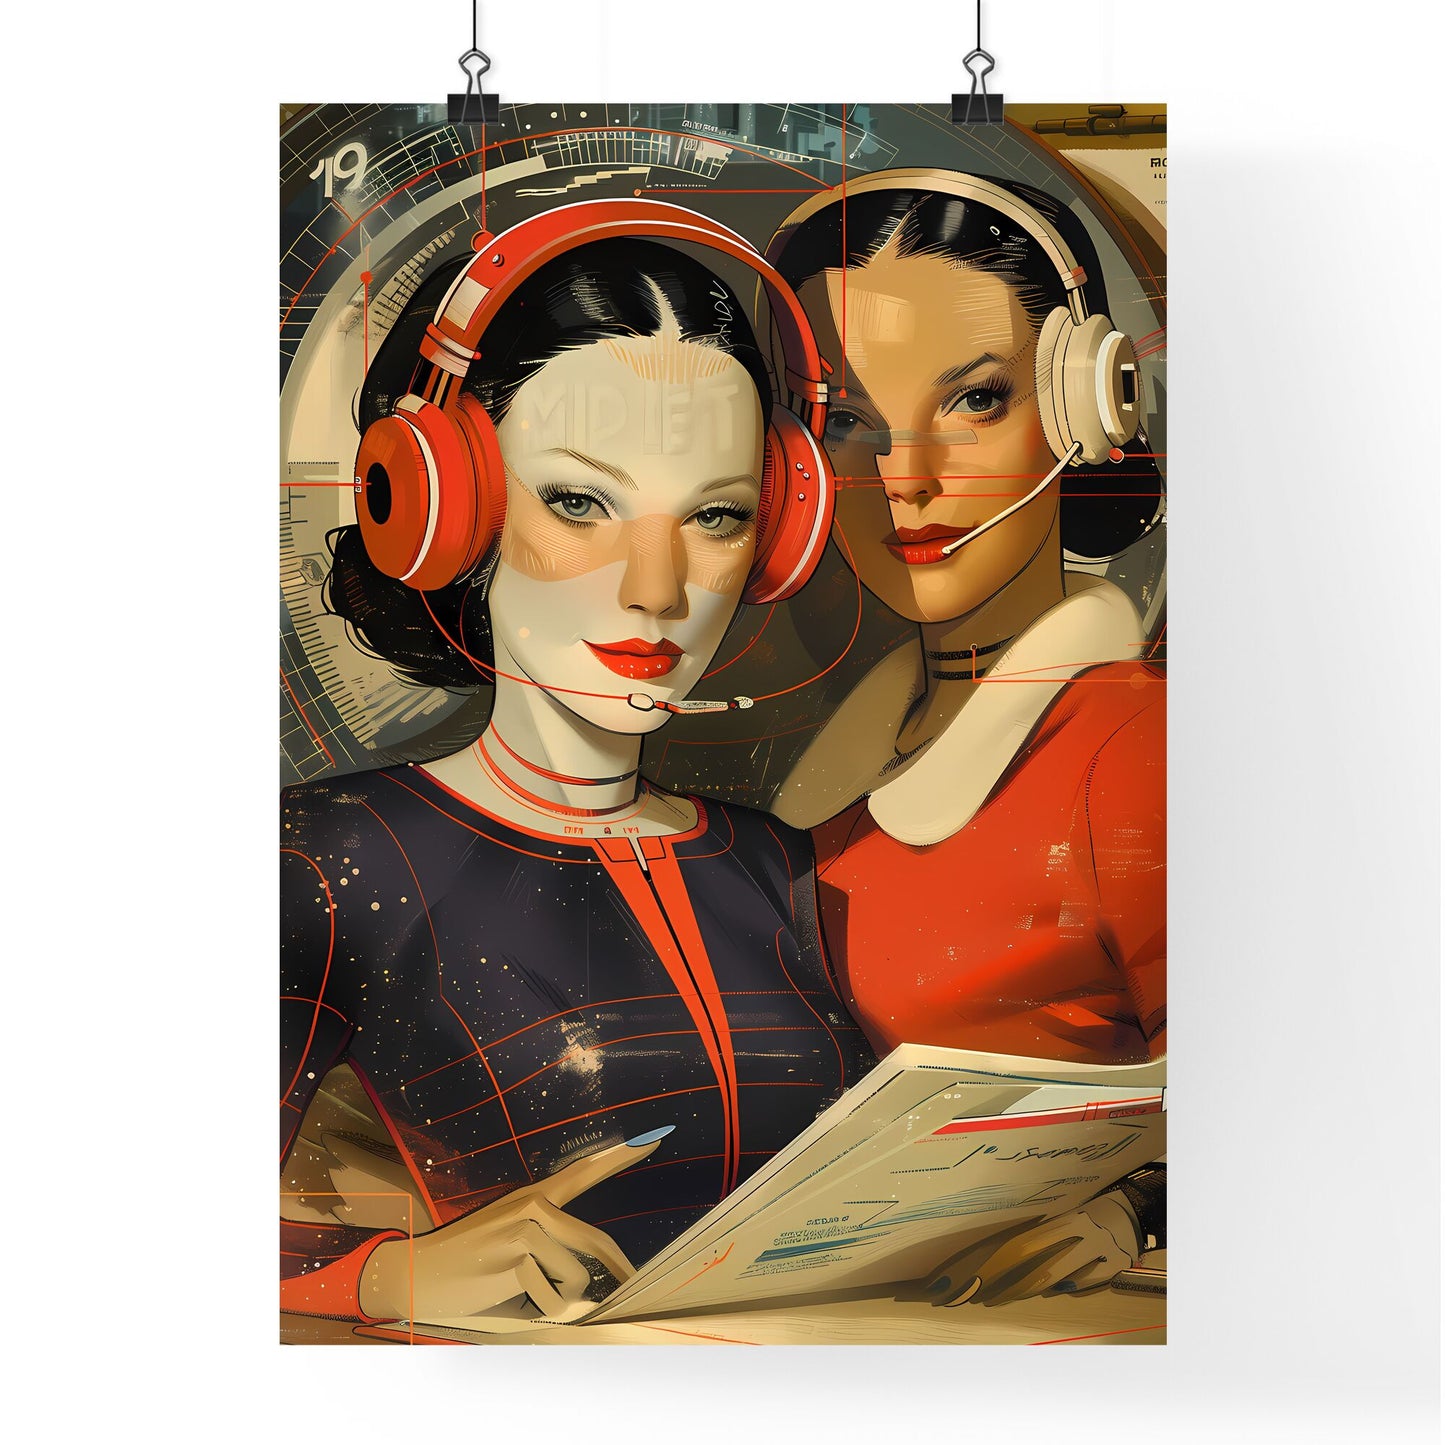 Poster Design | Technology Sector | Post-War Italian Style | Vibrant Painting | Woman with Headphones and Paper Default Title